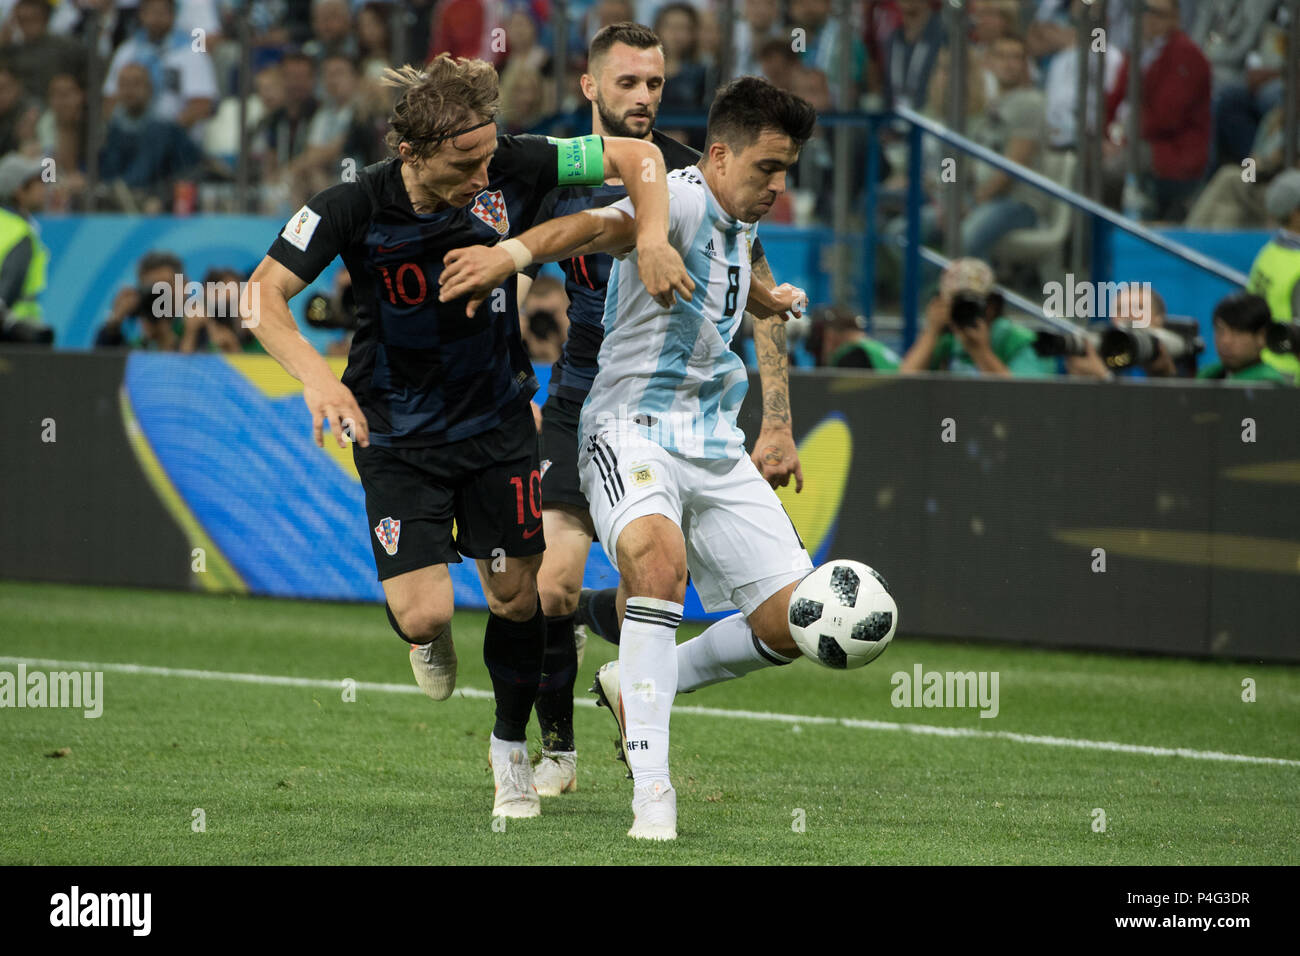 Moscow, Russia. 21st June, 2018. Luka MODRIC (left, CRO) versus Marcos ACUNA (ARG), behind Marcelo BROZOVIC (CRO), Action, Fight for the ball, Argentina (ARG) - Croatia (CRO), Preliminary round, Group D, Game 23, on 21.06. 2018 in Moscow; Football World Cup 2018 in Russia from 14.06. - 15.07.2018. | usage worldwide Credit: dpa picture alliance/Alamy Live News Stock Photo